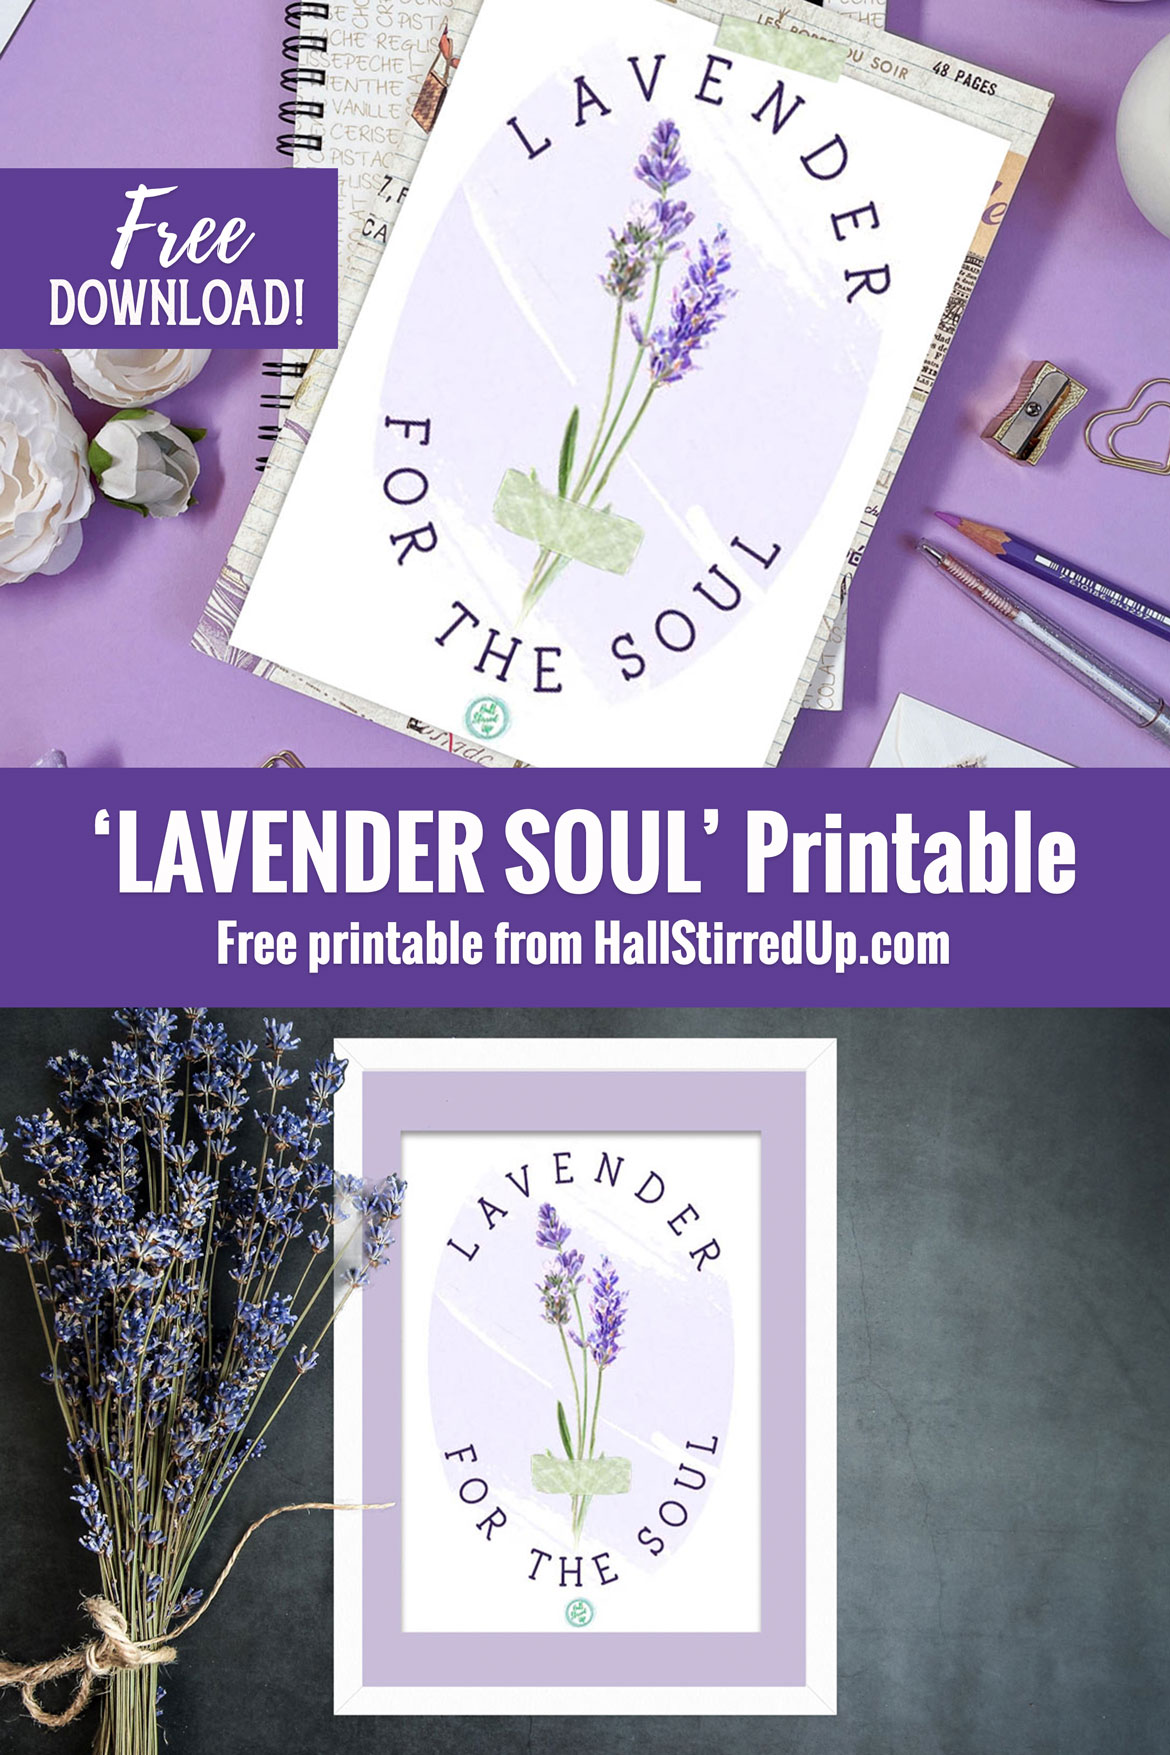 Favorite Lavender quotes and a pretty free printable